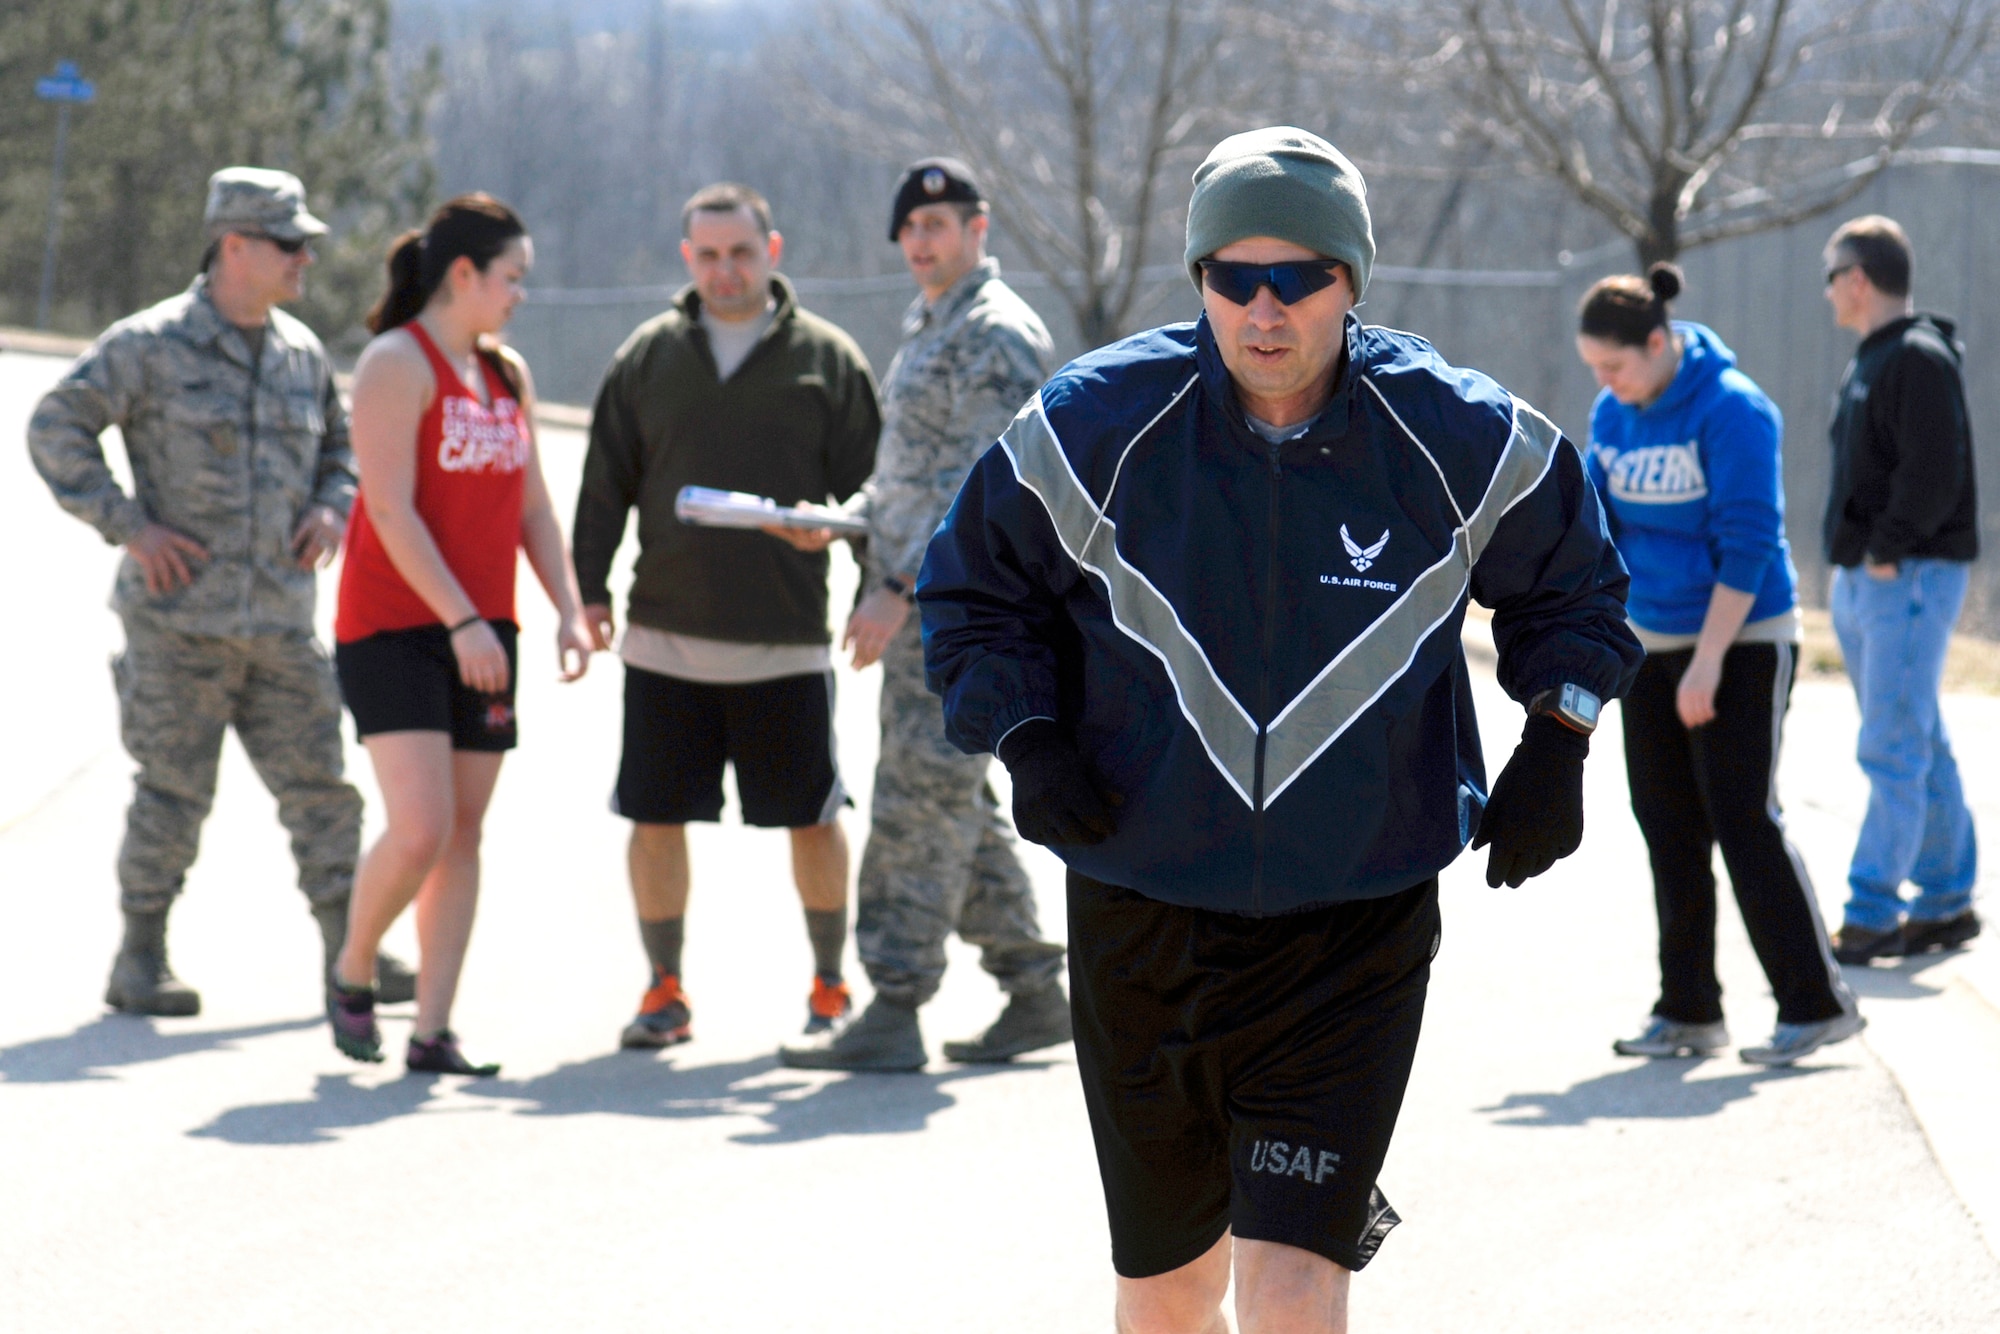 U.S. Air Force Lt. Col. William Wheeler leads as the first runner of the Tactical Air Control Party Association 24 Hour Run Challenge at the 182nd Airlift Wing in Peoria, Ill., March 28, 2013.  Sixty-two runners ran 161.75 miles around the installation over the course of 24 hours and raised over $8,200 in support of the TACP community and their families.  The 182nd team also ran in remembrance of Staff Sgt. Jacob Frazier, a member of the Peoria-based 169th Air Support Operations Squadron who was killed in action near Geresk, Afghanistan, 10 years earlier on March 29, 2003.    (U.S. Air Force photo by Staff Sgt. Lealan Buehrer//Released)